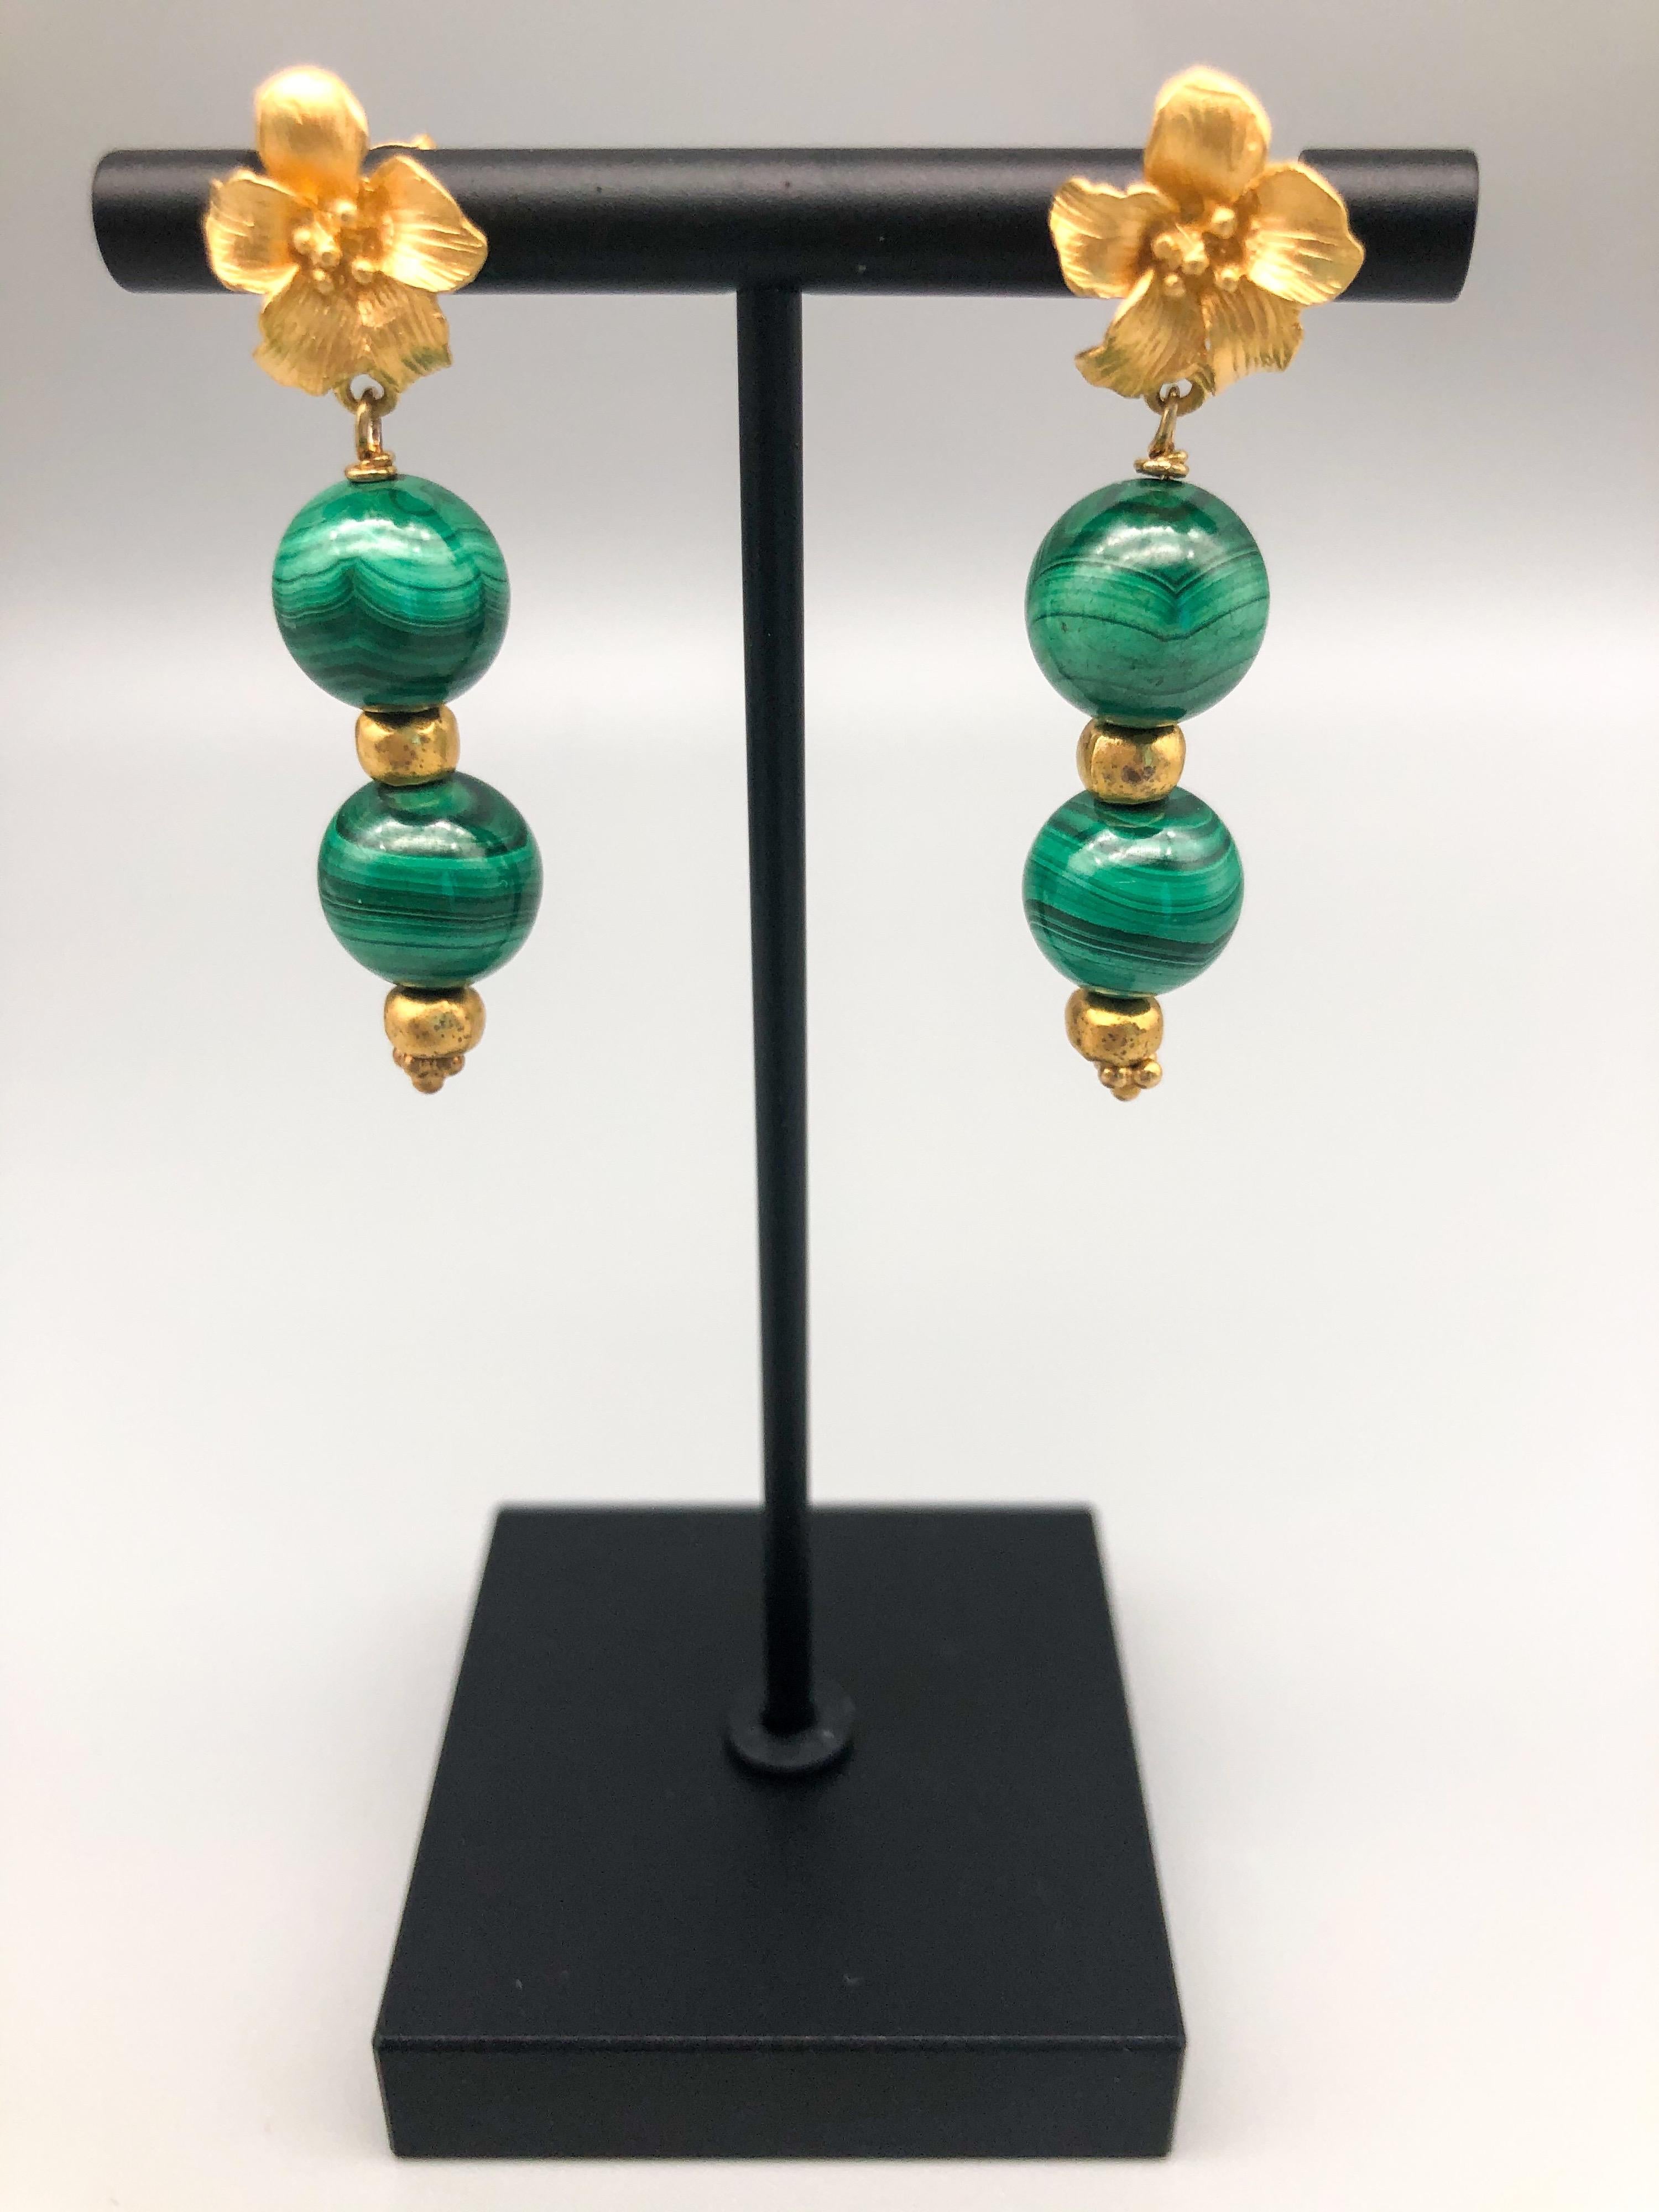 One-of-a-Kind

Double malachite beads dropped from a 22k on Sterling Silver (vermeil) lily.
These beautiful Malachite earrings will make a statement about you every time you wear them!